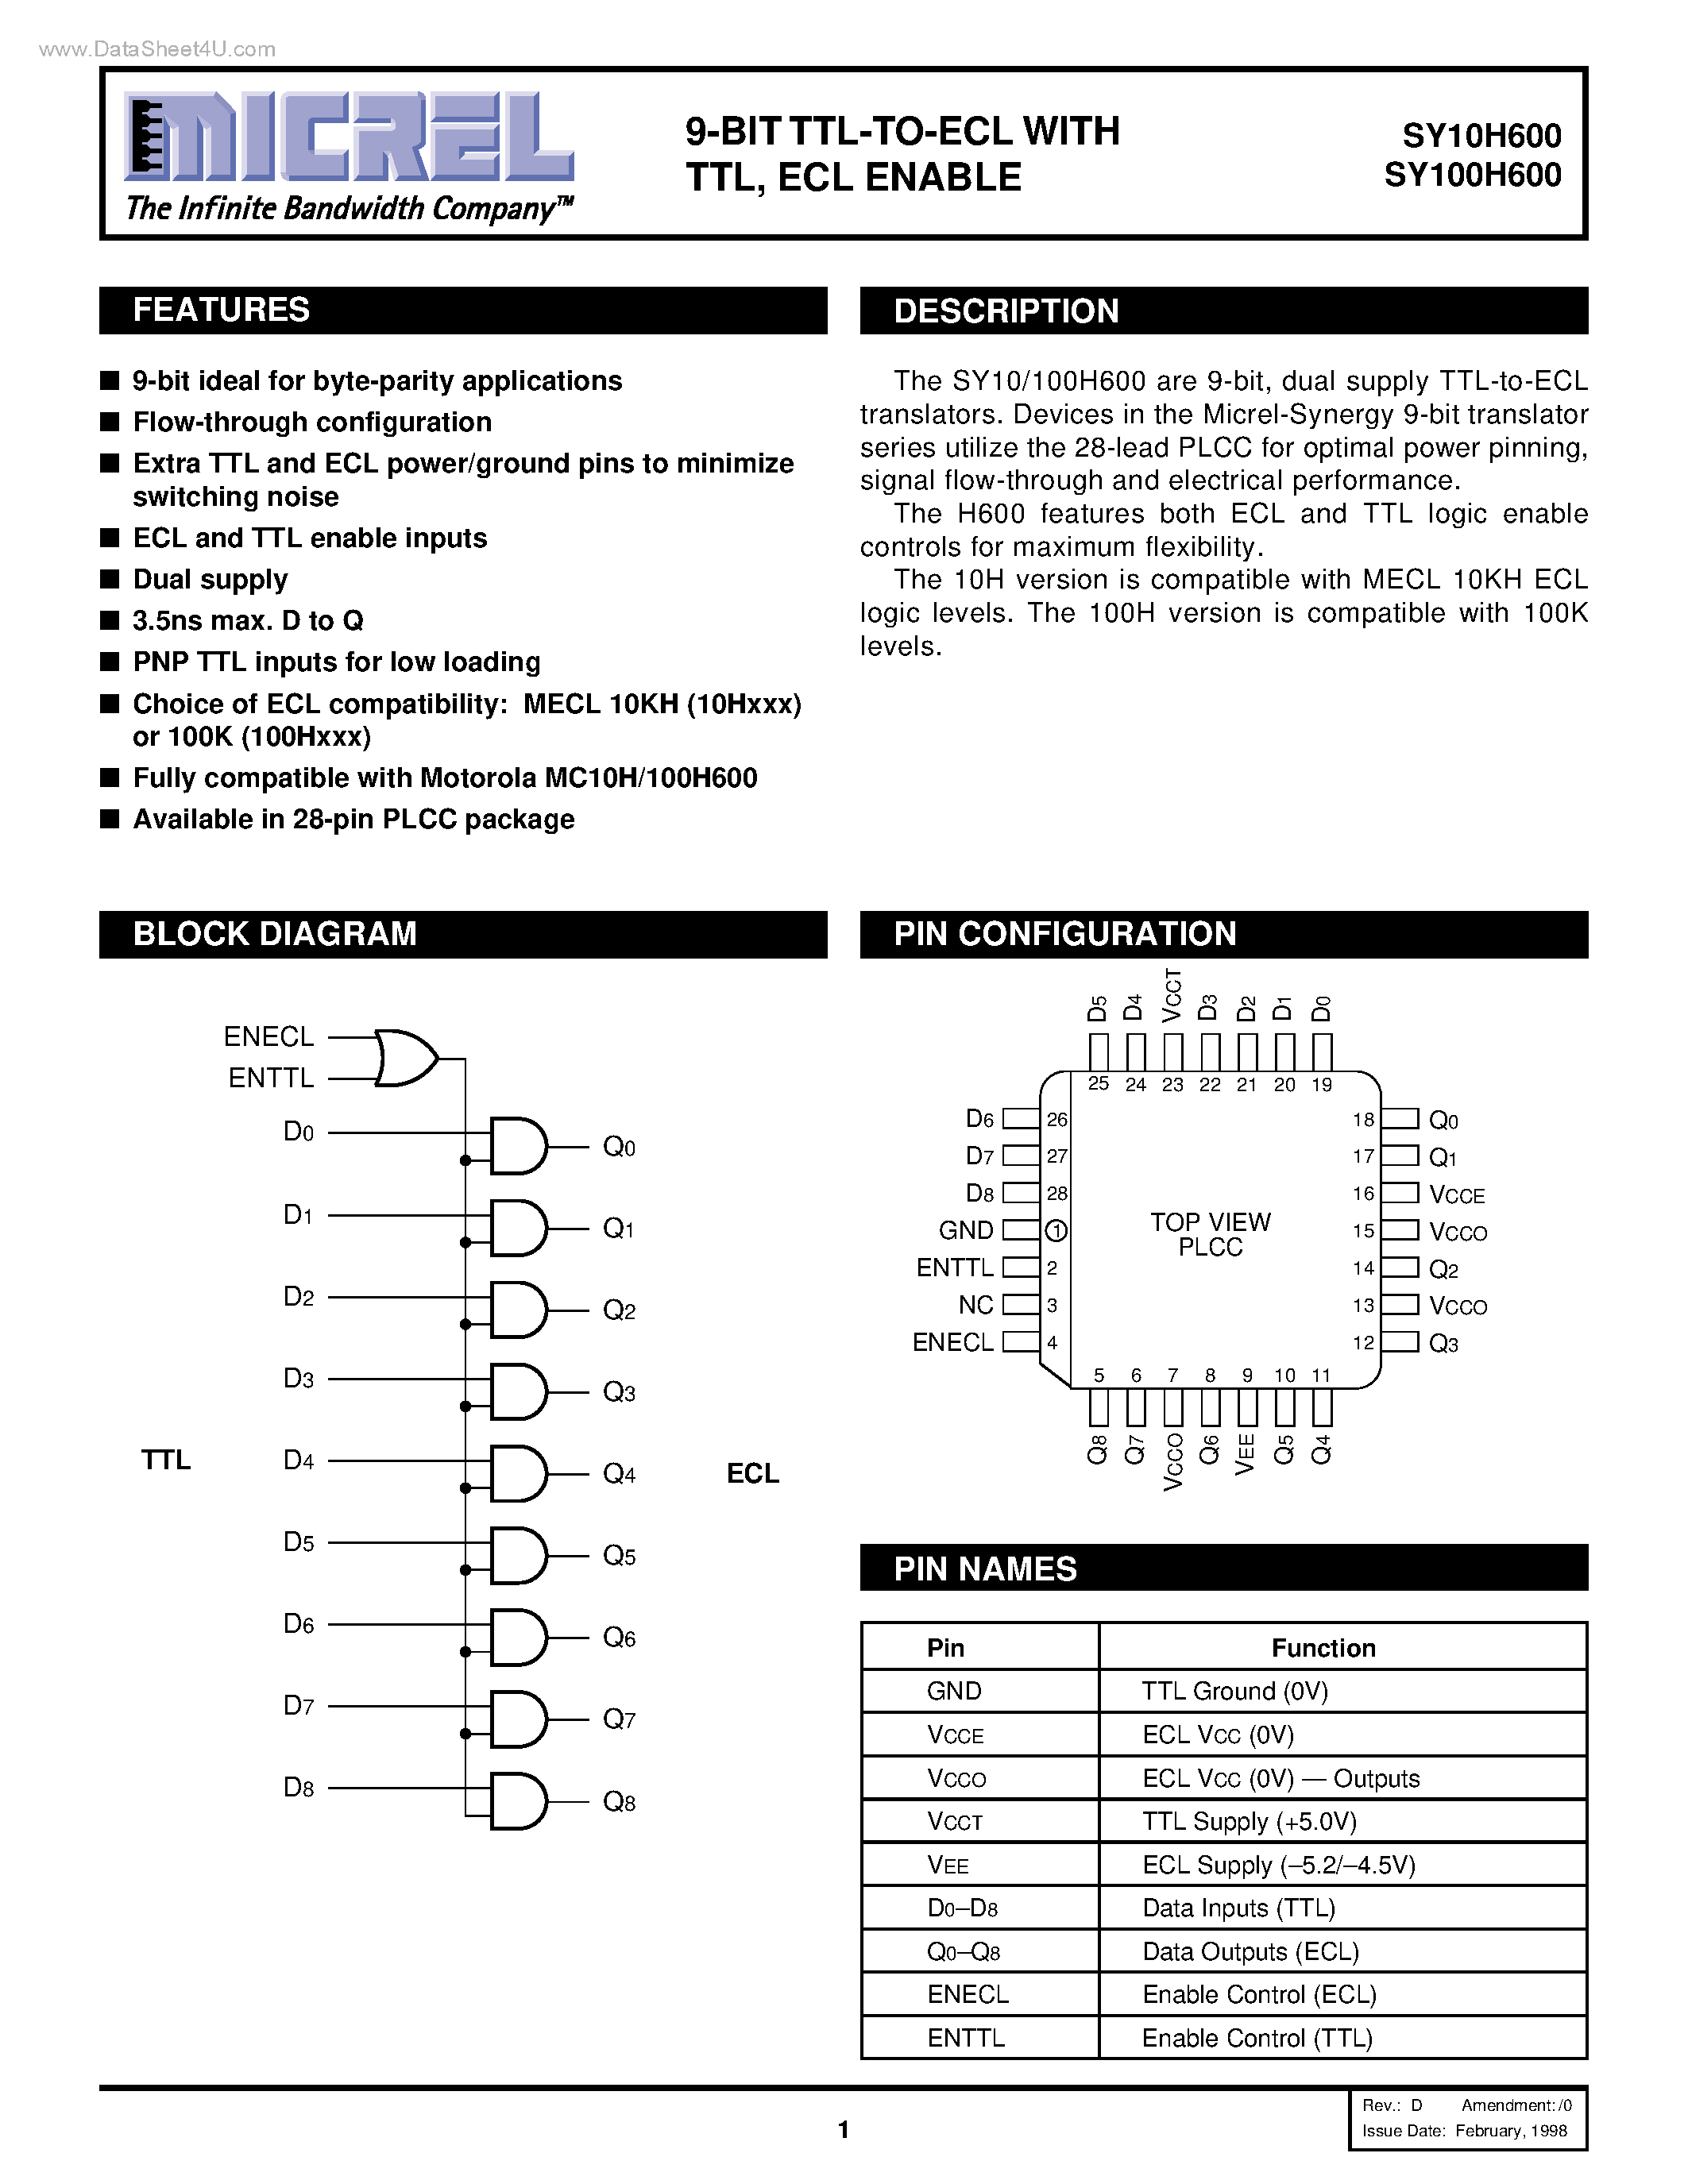 Datasheet SY100H600 - 9-BIT TTL-TO-ECL page 1